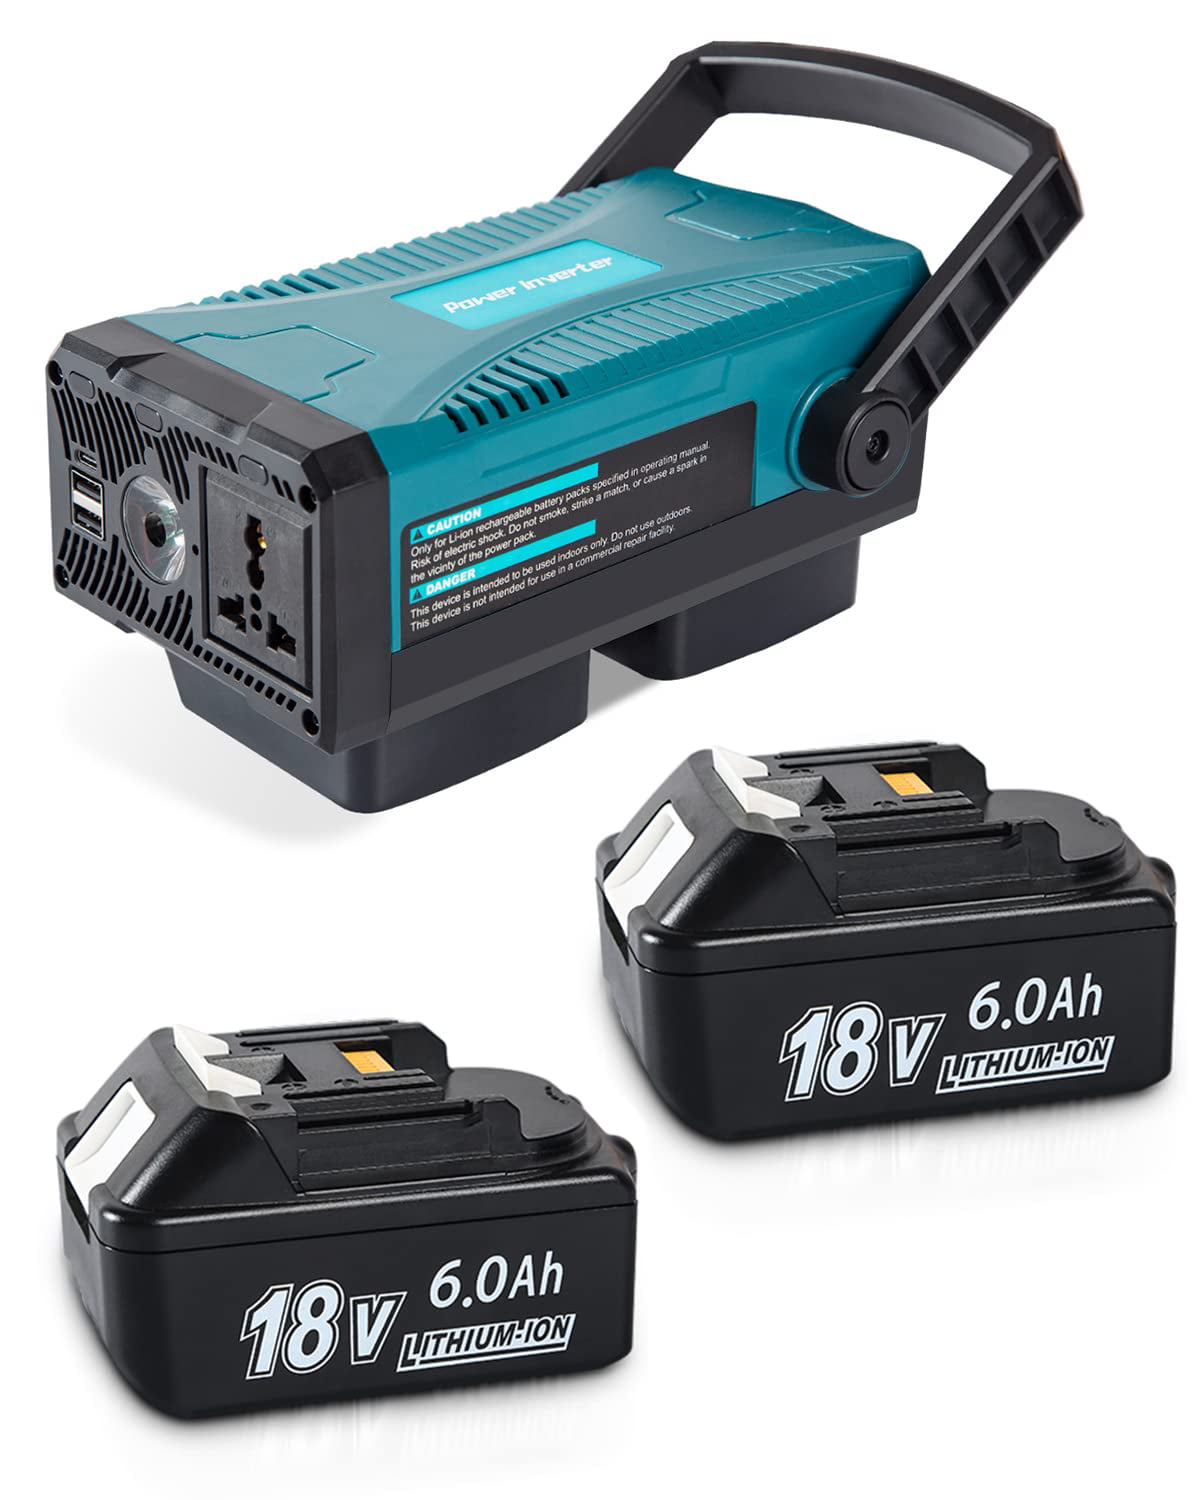 2Pack 6000mAh Replacement for Makita 18V Battery and a Power Inverter Compatible with Makita 18V Battery Turn to 110V/150W Power Station (Include Power & 2Pack Battery) - Walmart.com